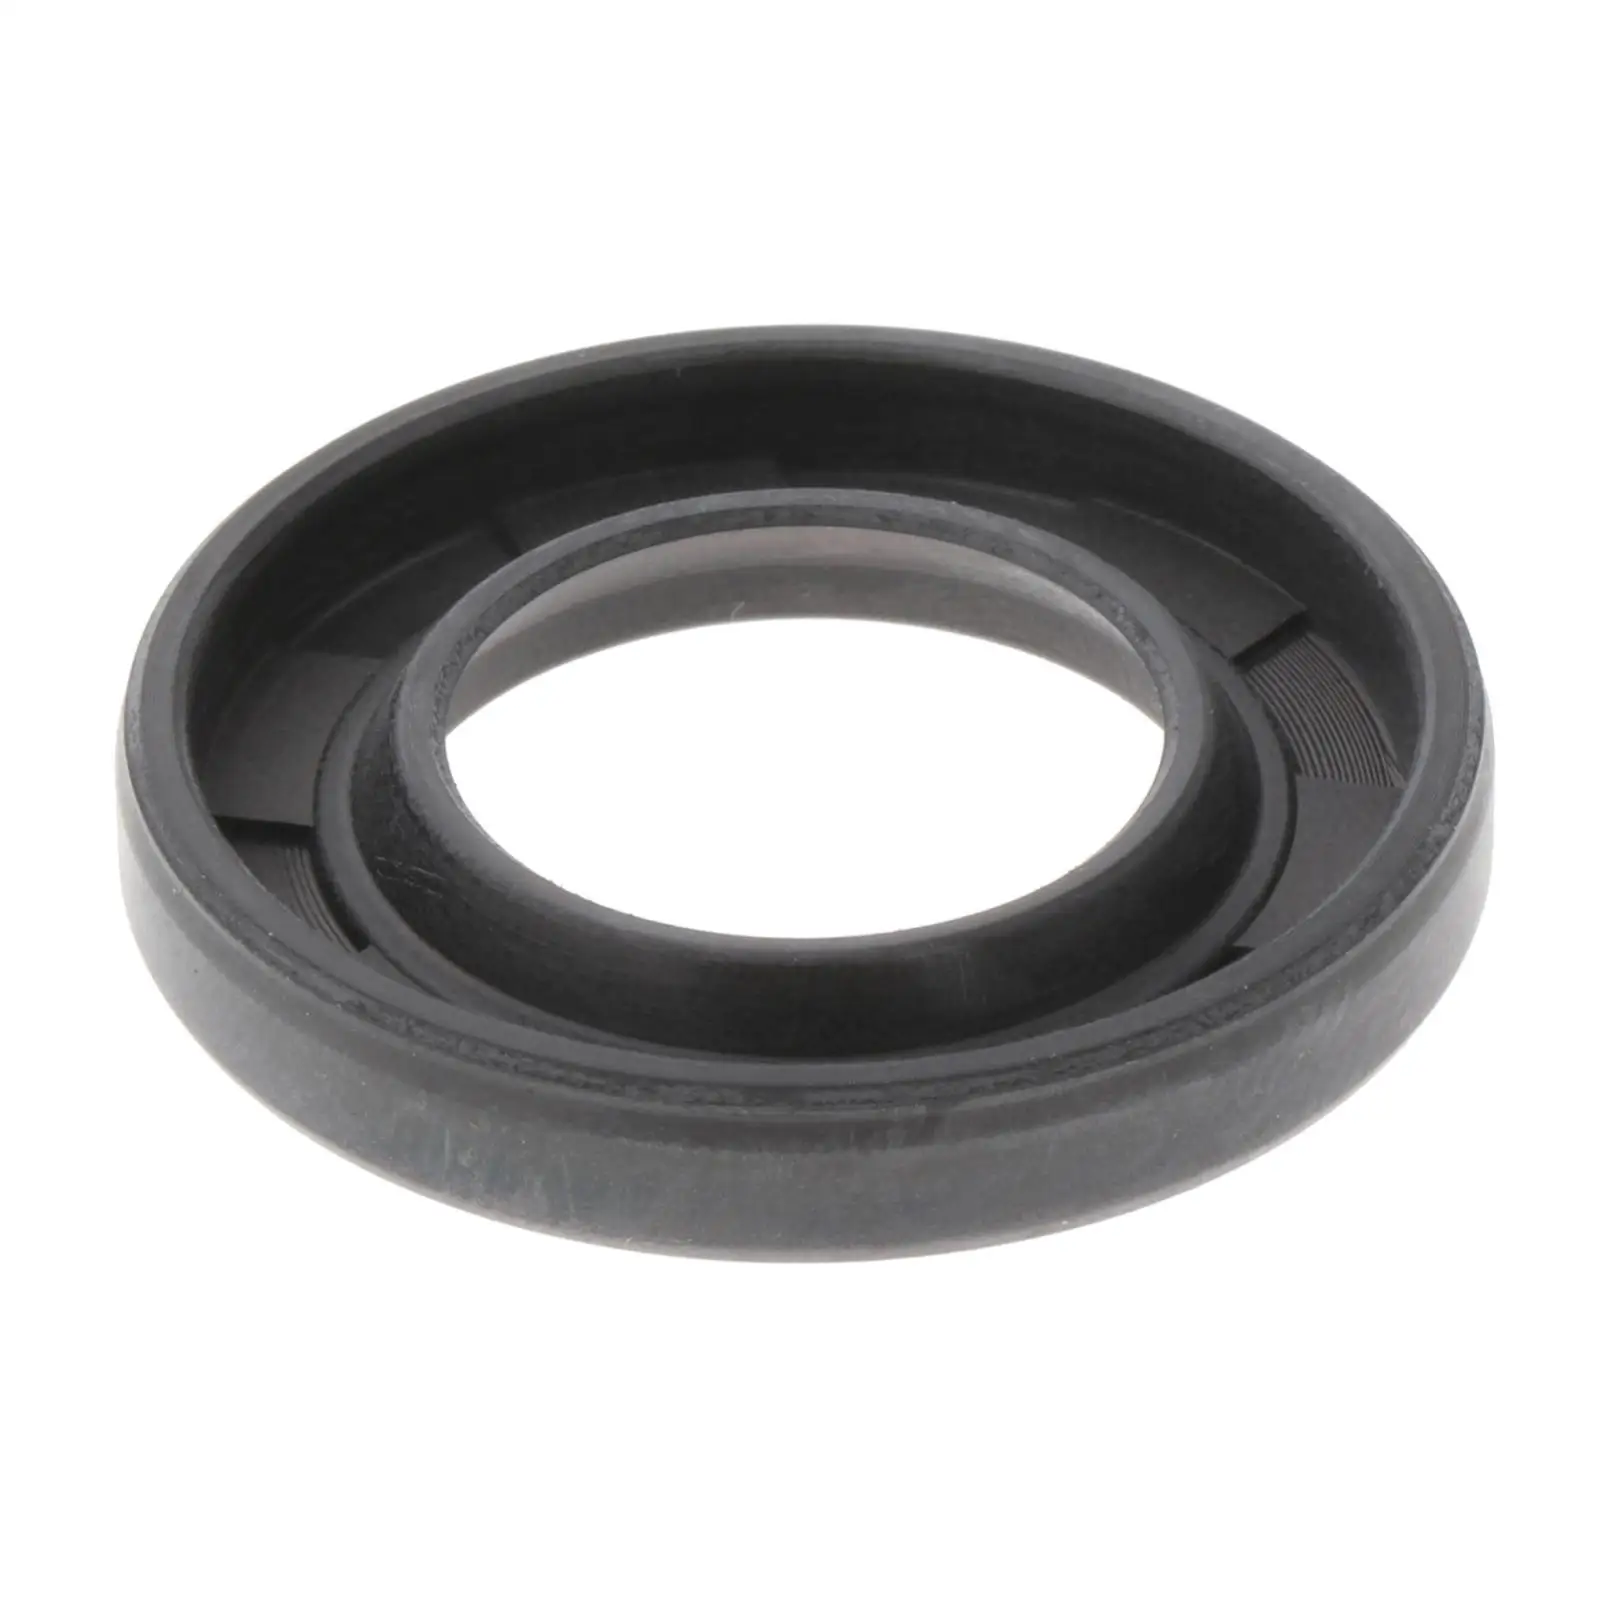 Oil Seal Direct Replaces 93106-18M01 Fits for Yamaha Outboard Motor 60HP 70HP 2 Stroke